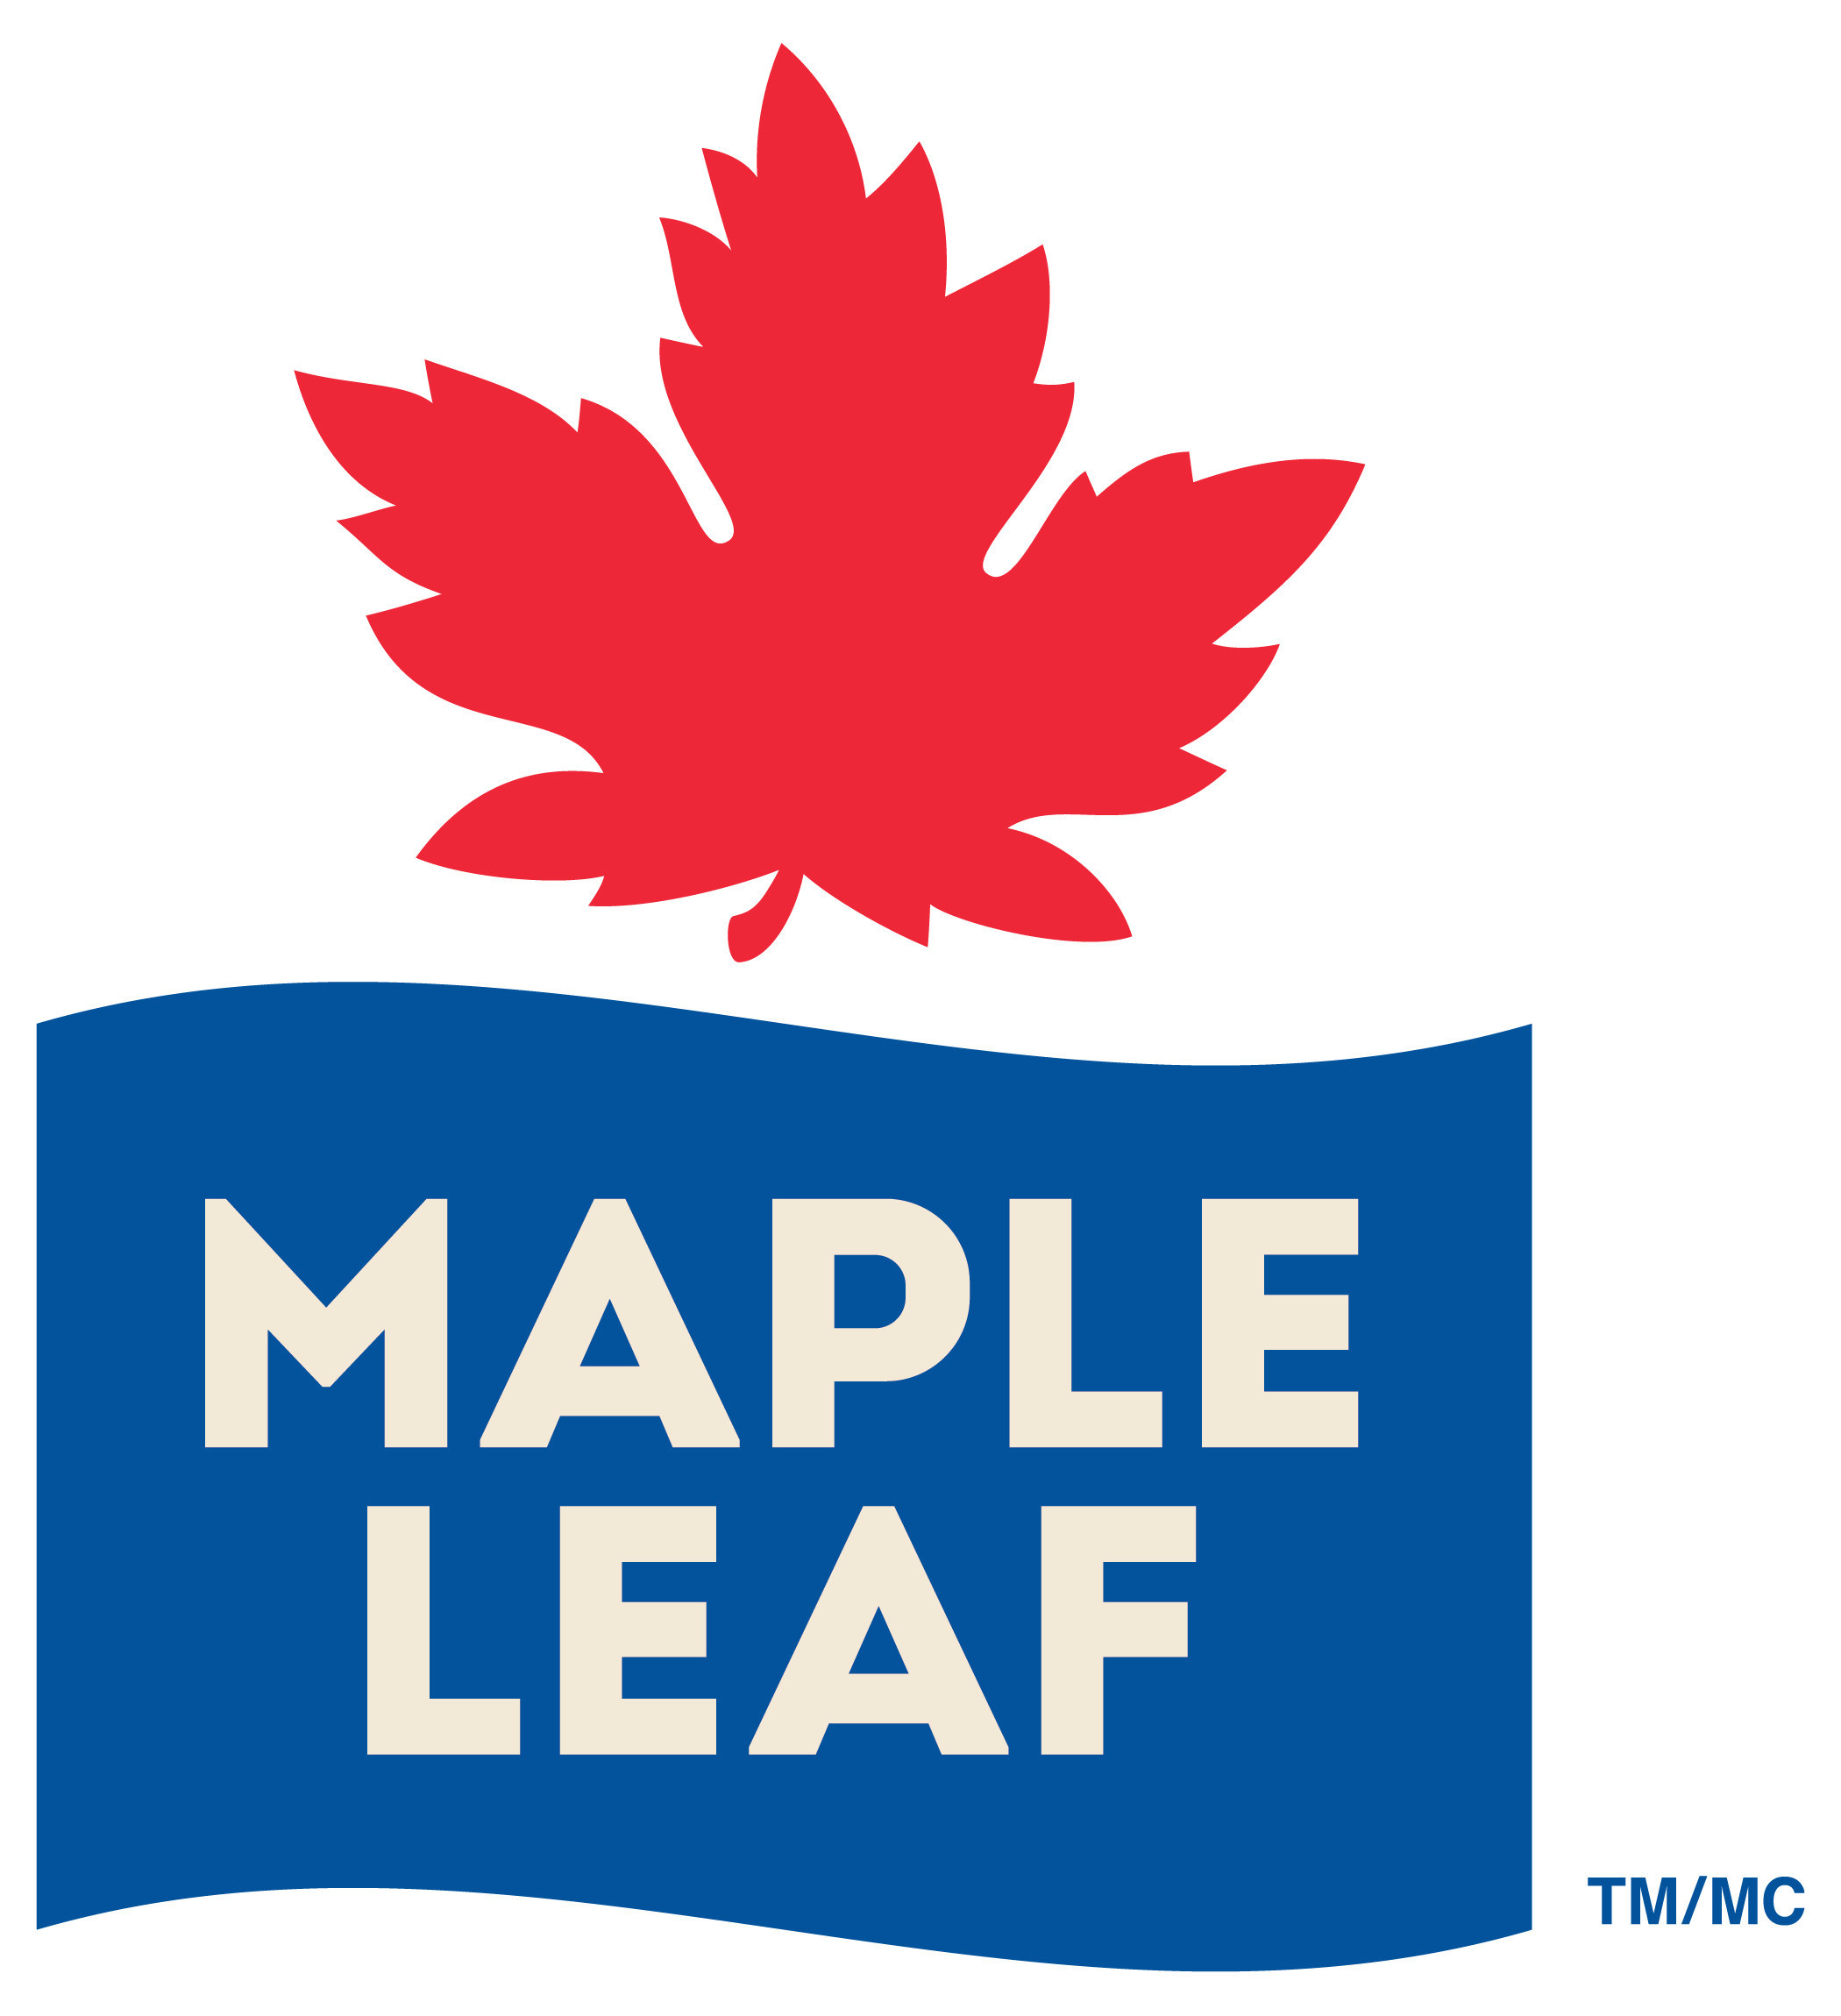 Maple Leaf Foods Completes Construction of its New World-Class London Poultry Plant and is On Track to Start Production in Q4 2022